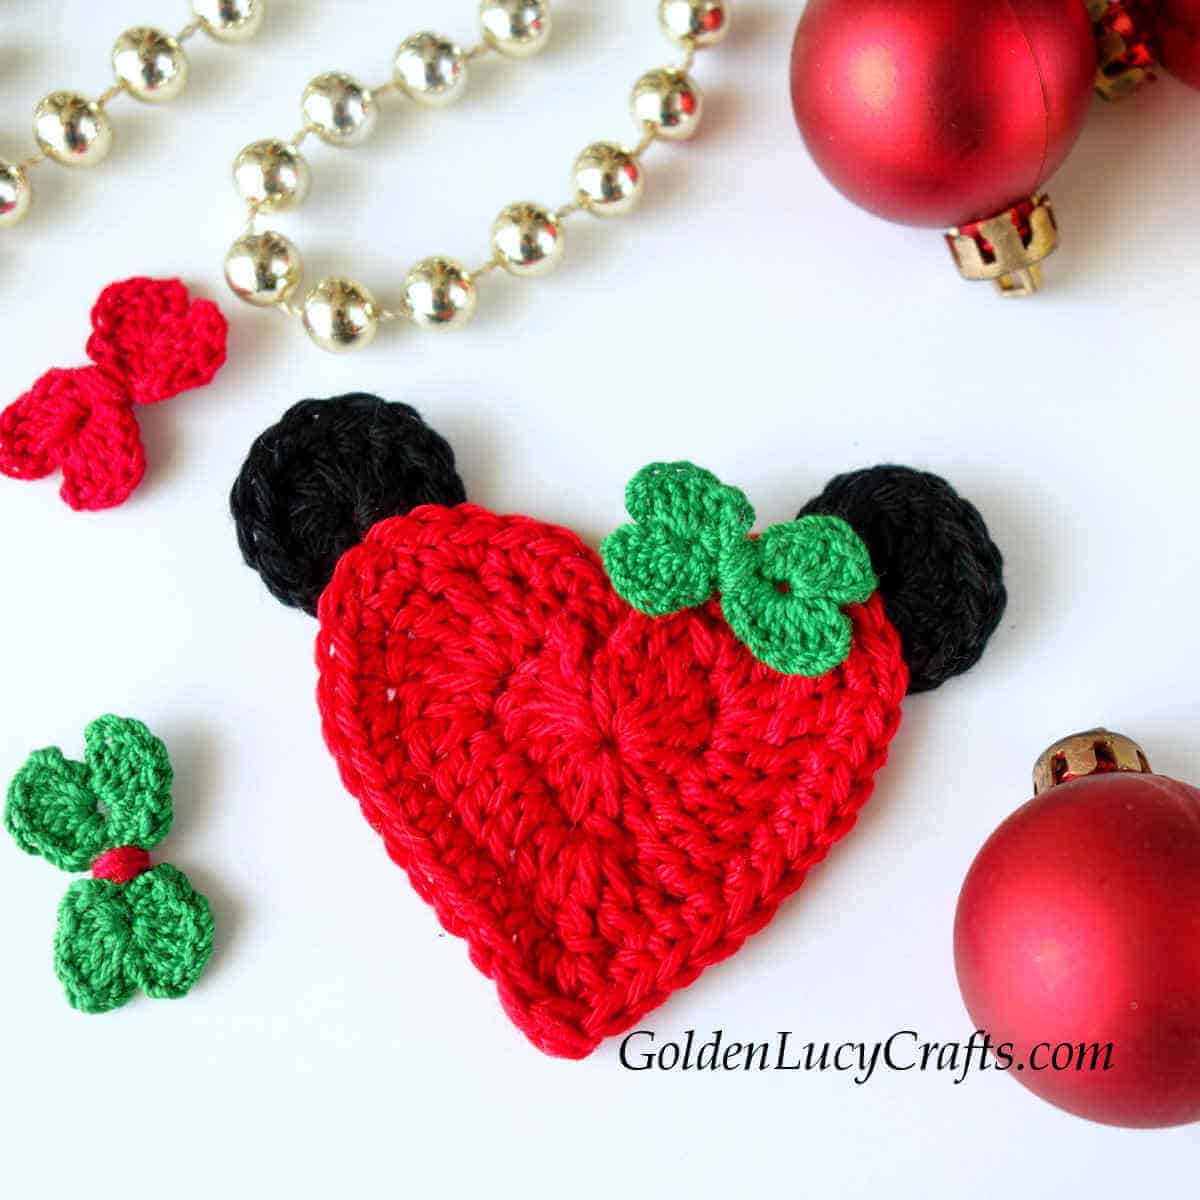 Crocheted red hear with black ears and green bow.